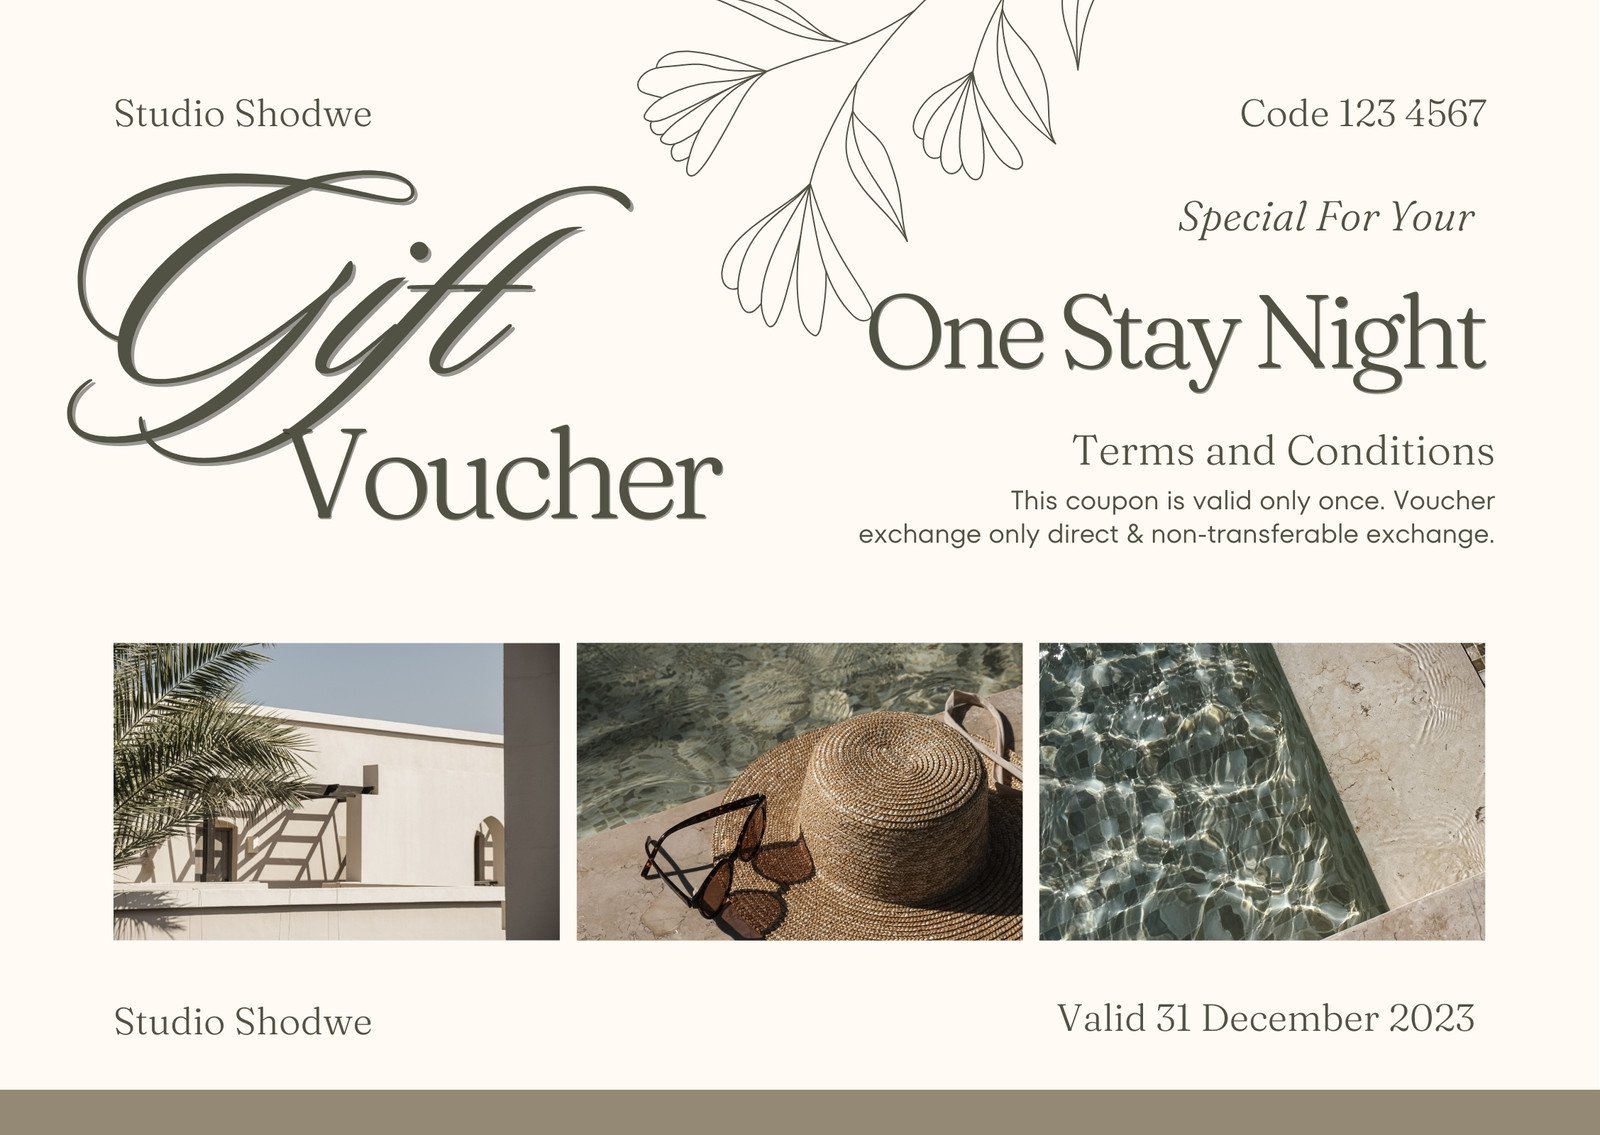 Gift Voucher Printing from £22.00 with Free Delivery